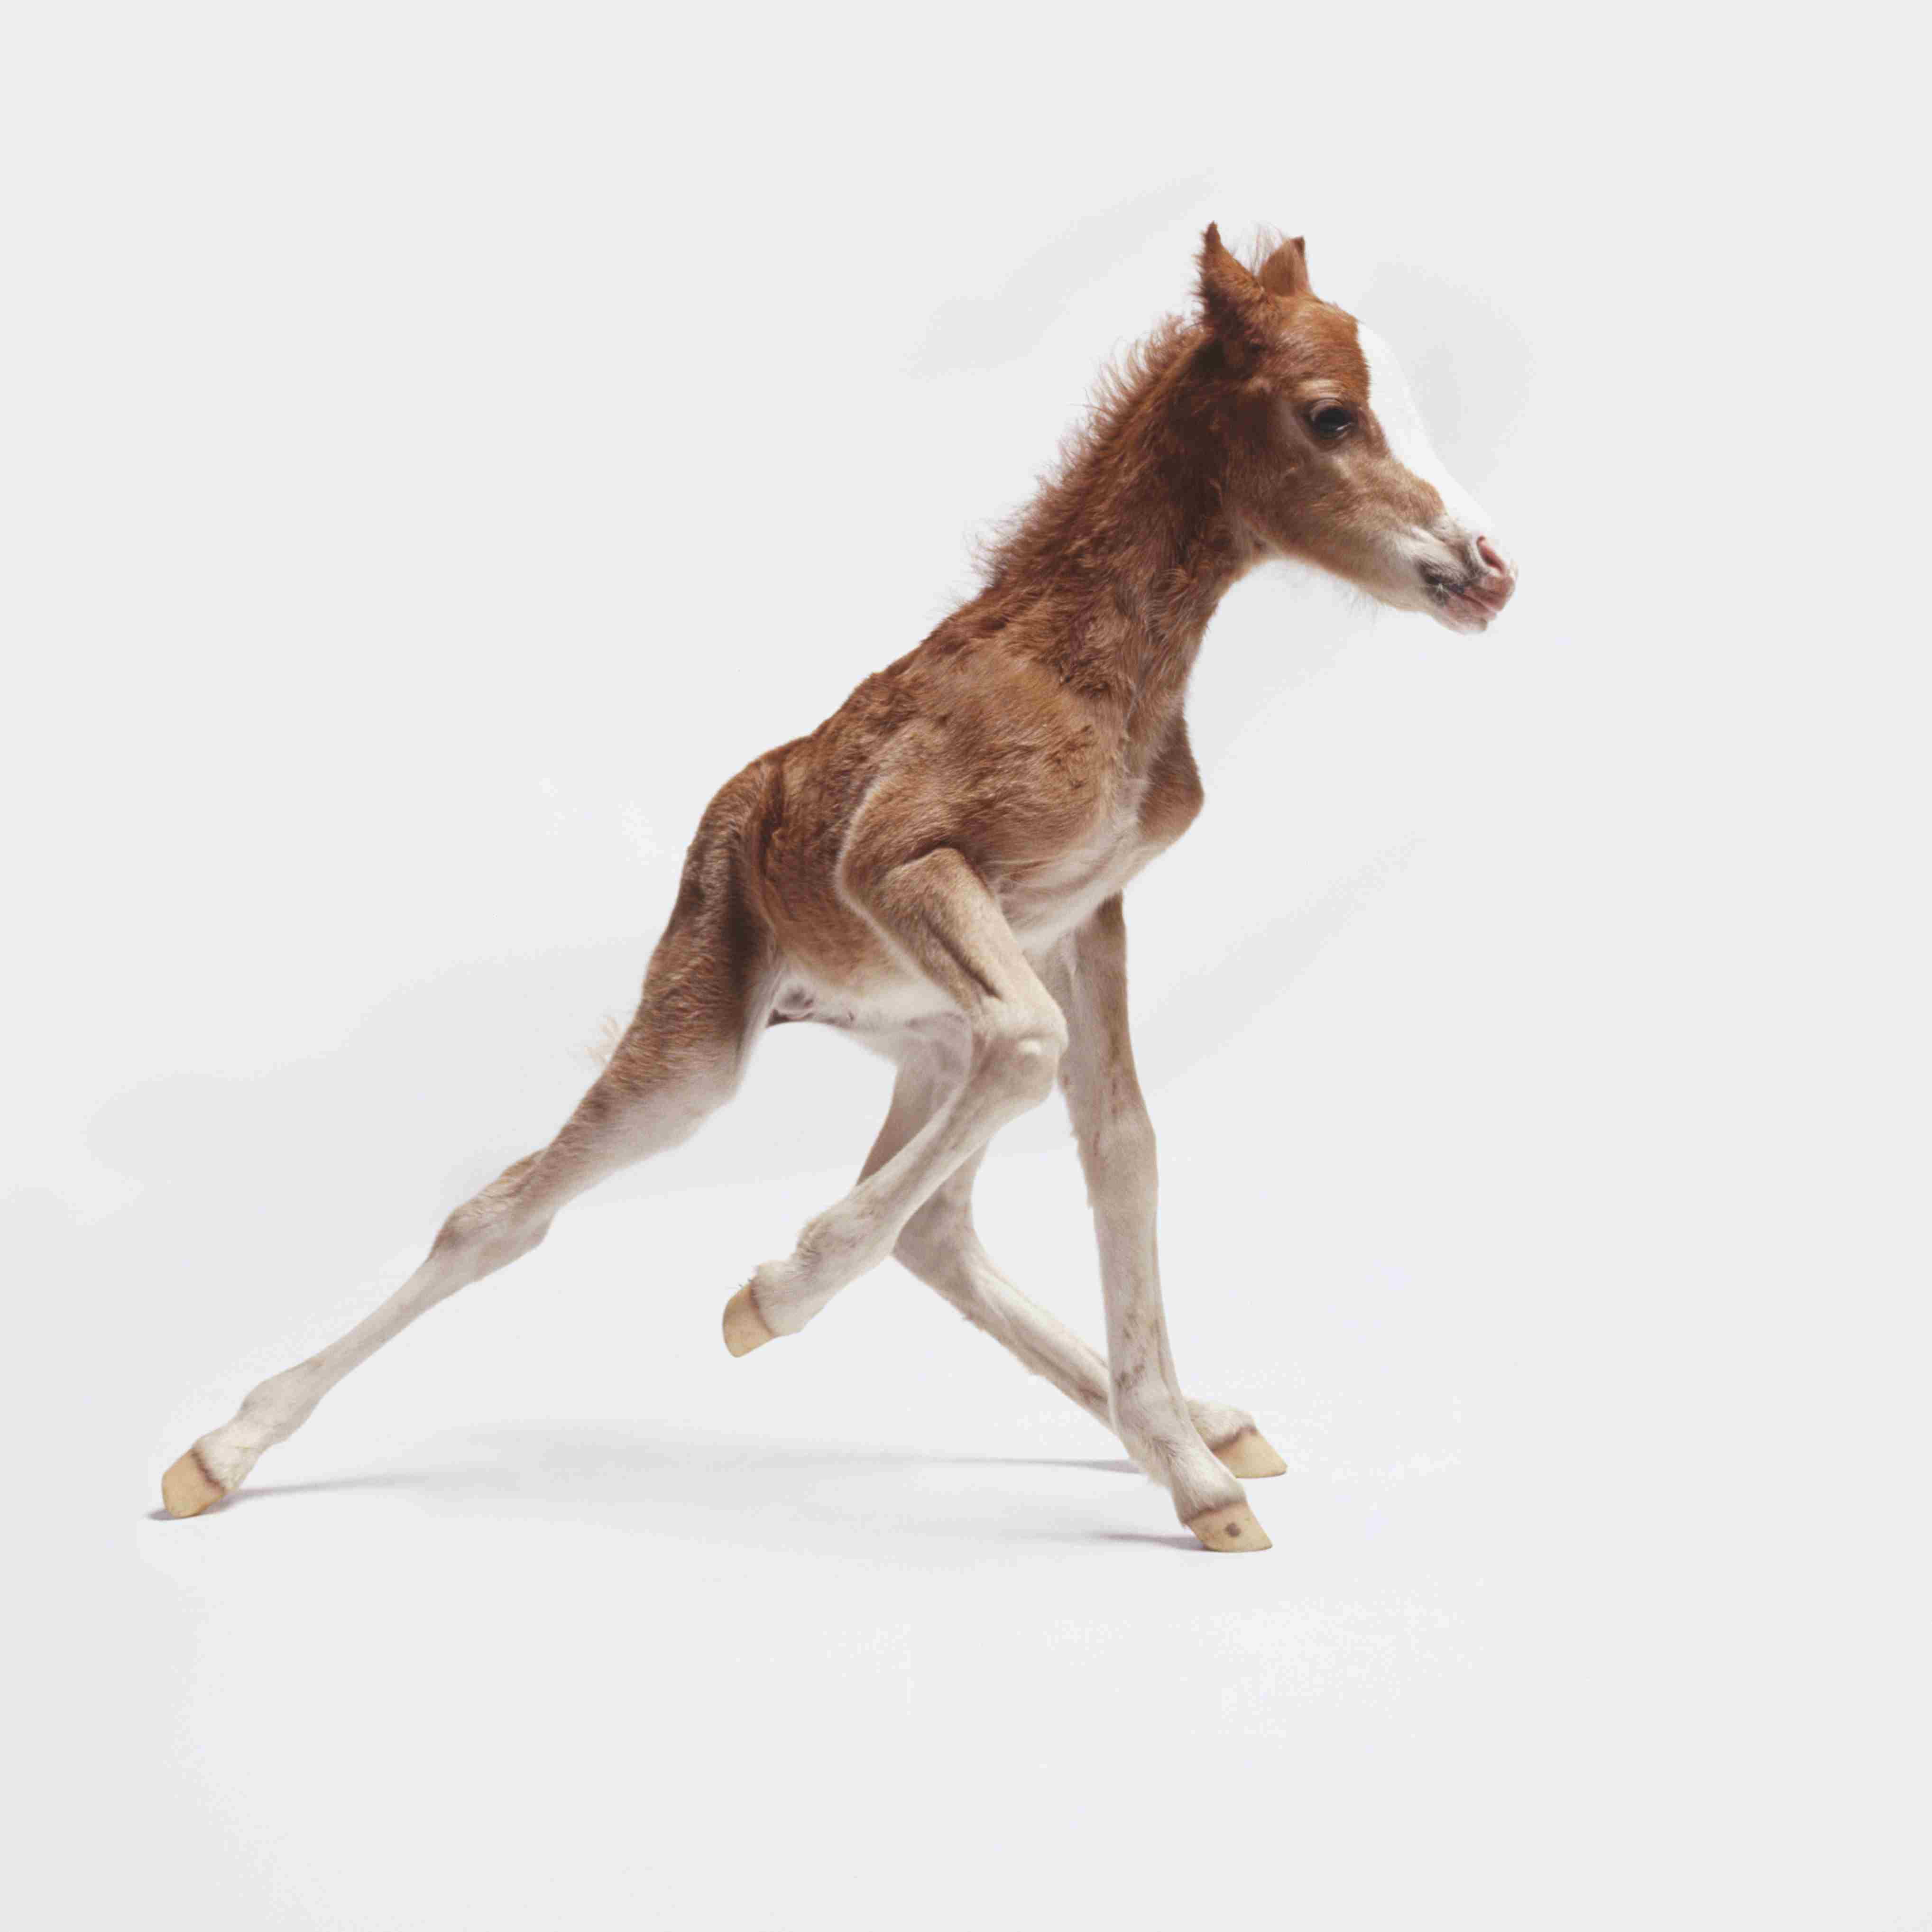 A newborn foal with wobbly legs trying to walk, side view.